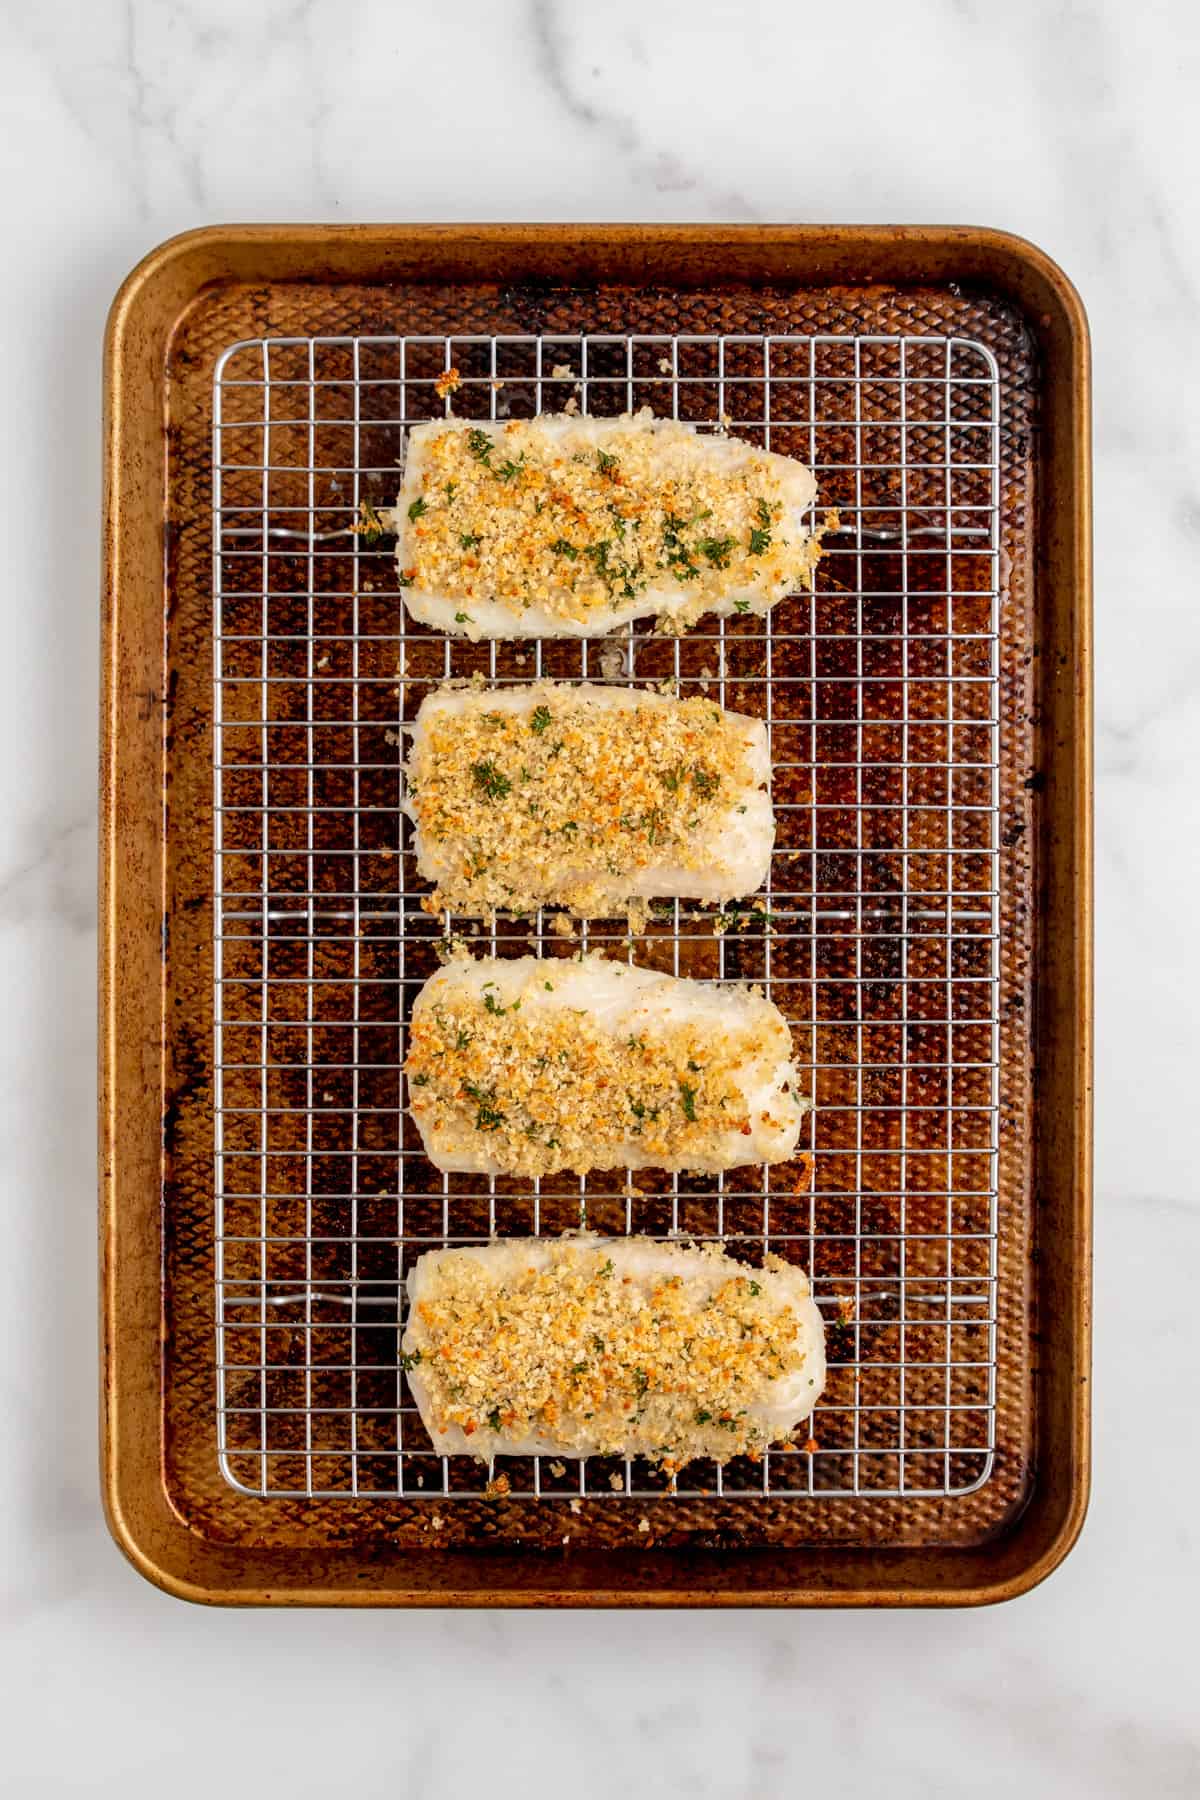 Baked panko crusted cod fillets on a baking sheet.